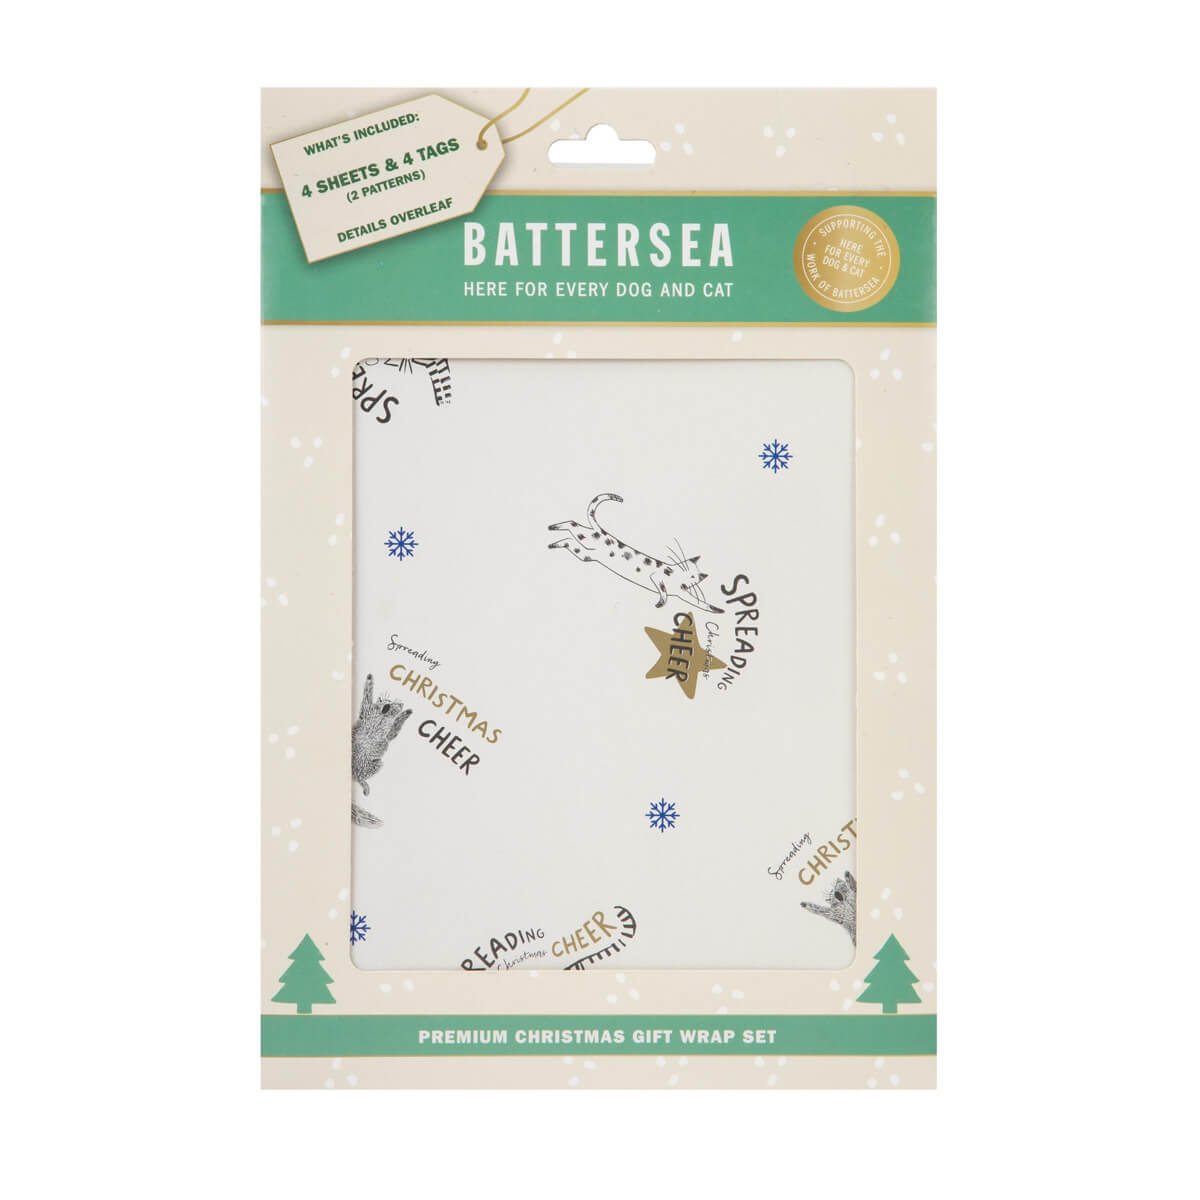 Christmas Battersea Cats Gift Wrapping Paper Set of 4 sheets - close up image of pack